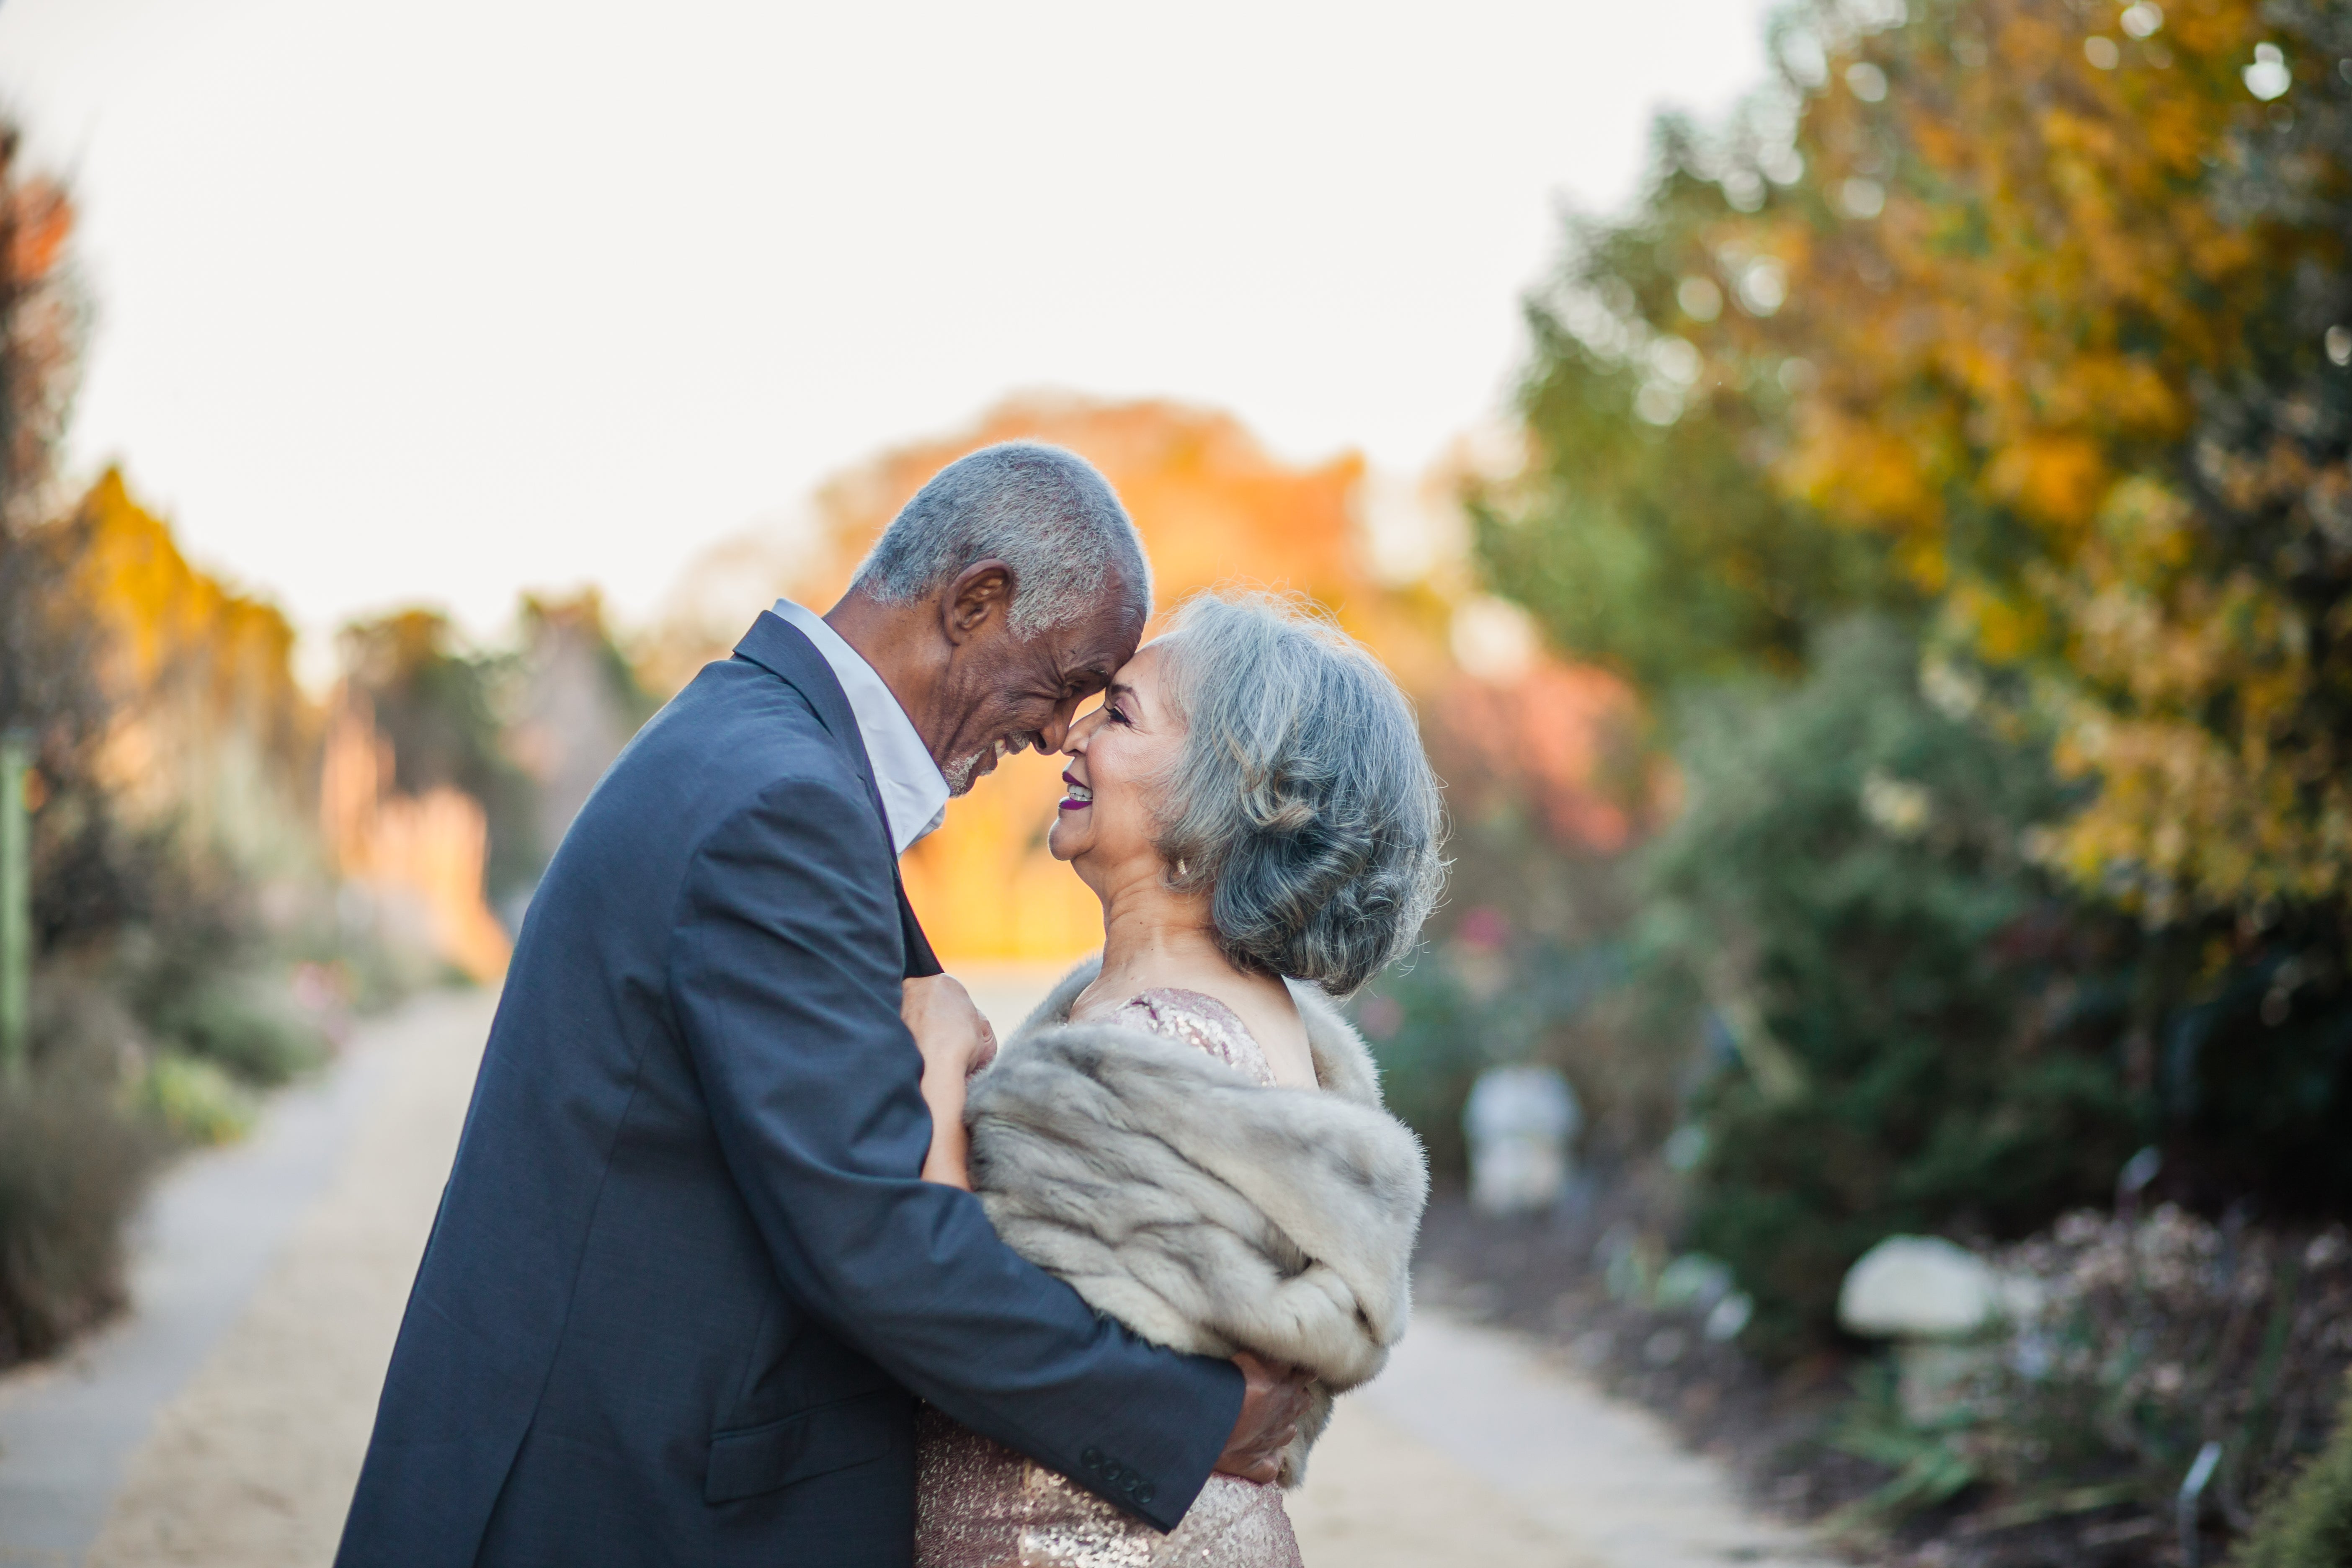 Married For 47 Years, This Couple Beat Cancer Twice and Now Their Story Is Winning The Internet
